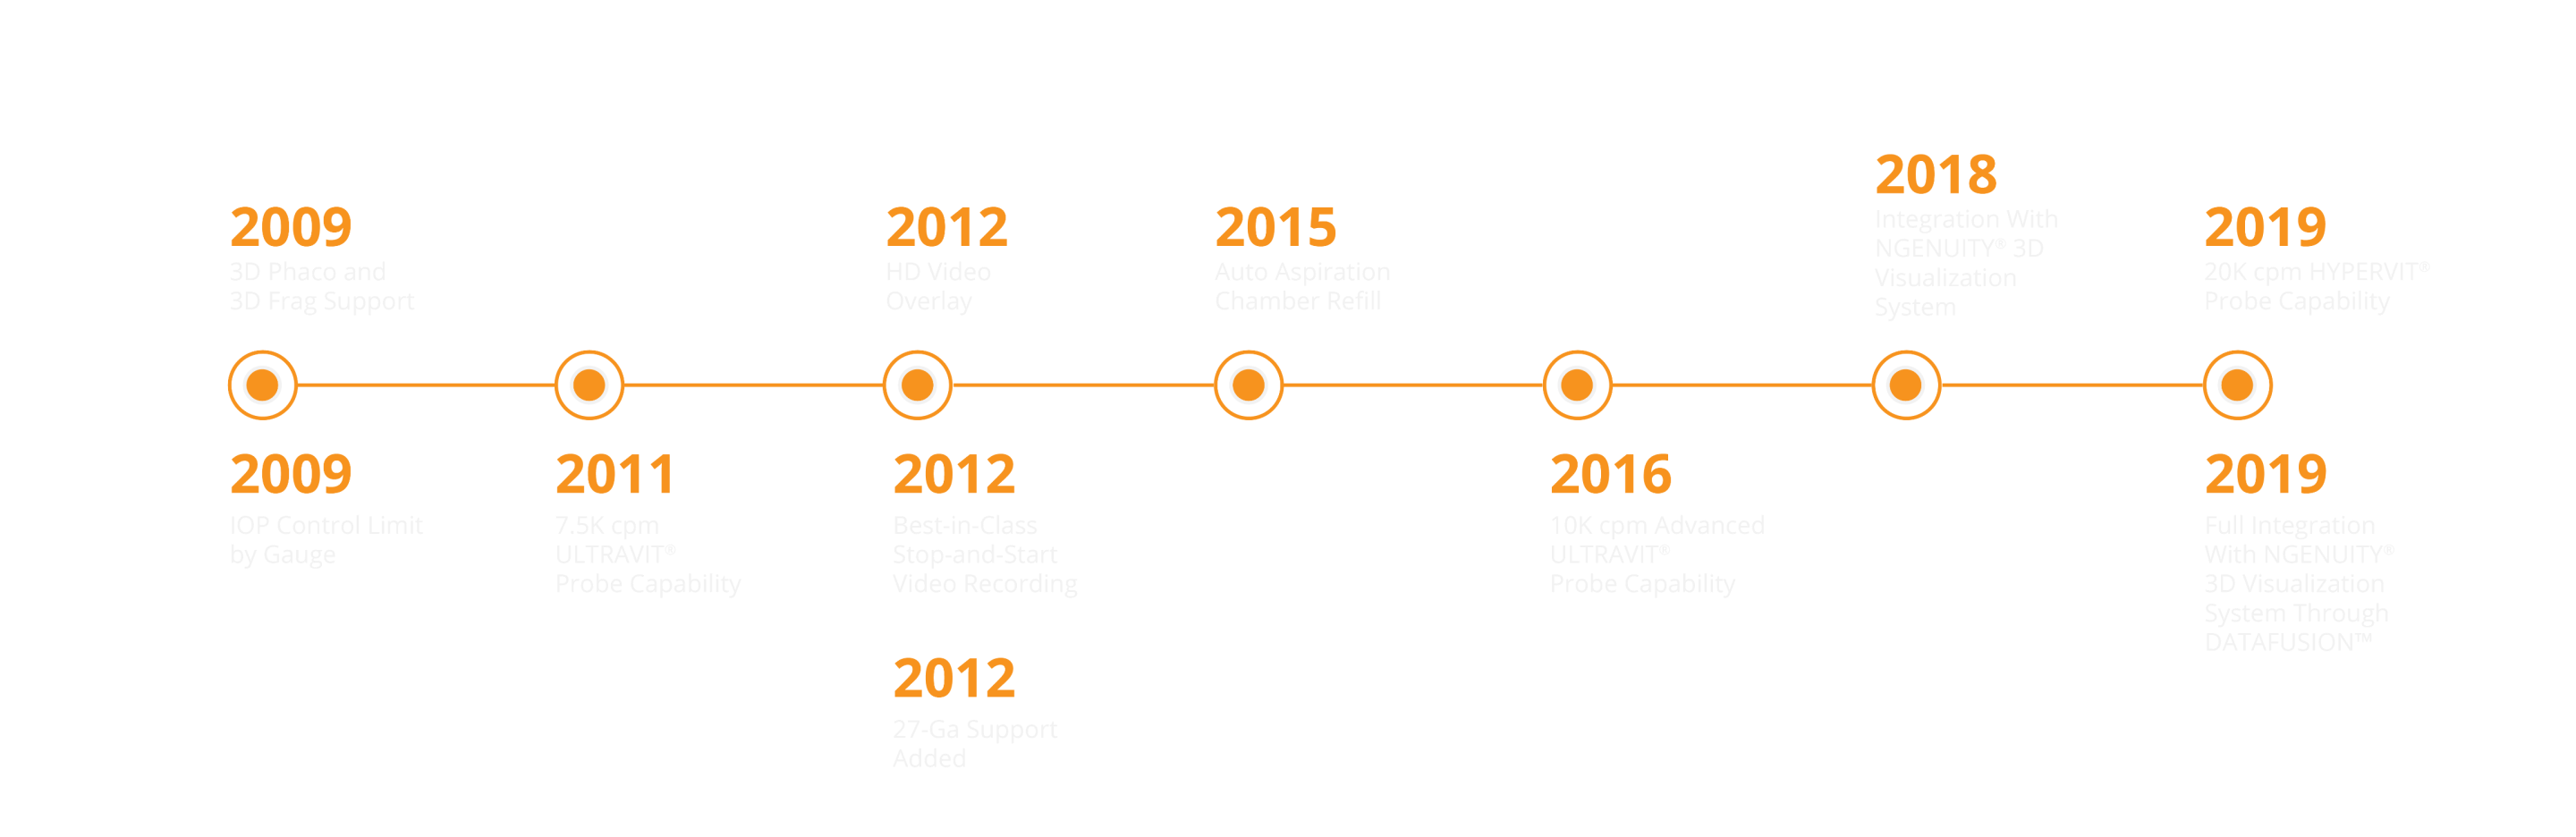 A timeline ranging from 2009 to 2019 showcasing the evolution of CONSTELLATION Vision System features.